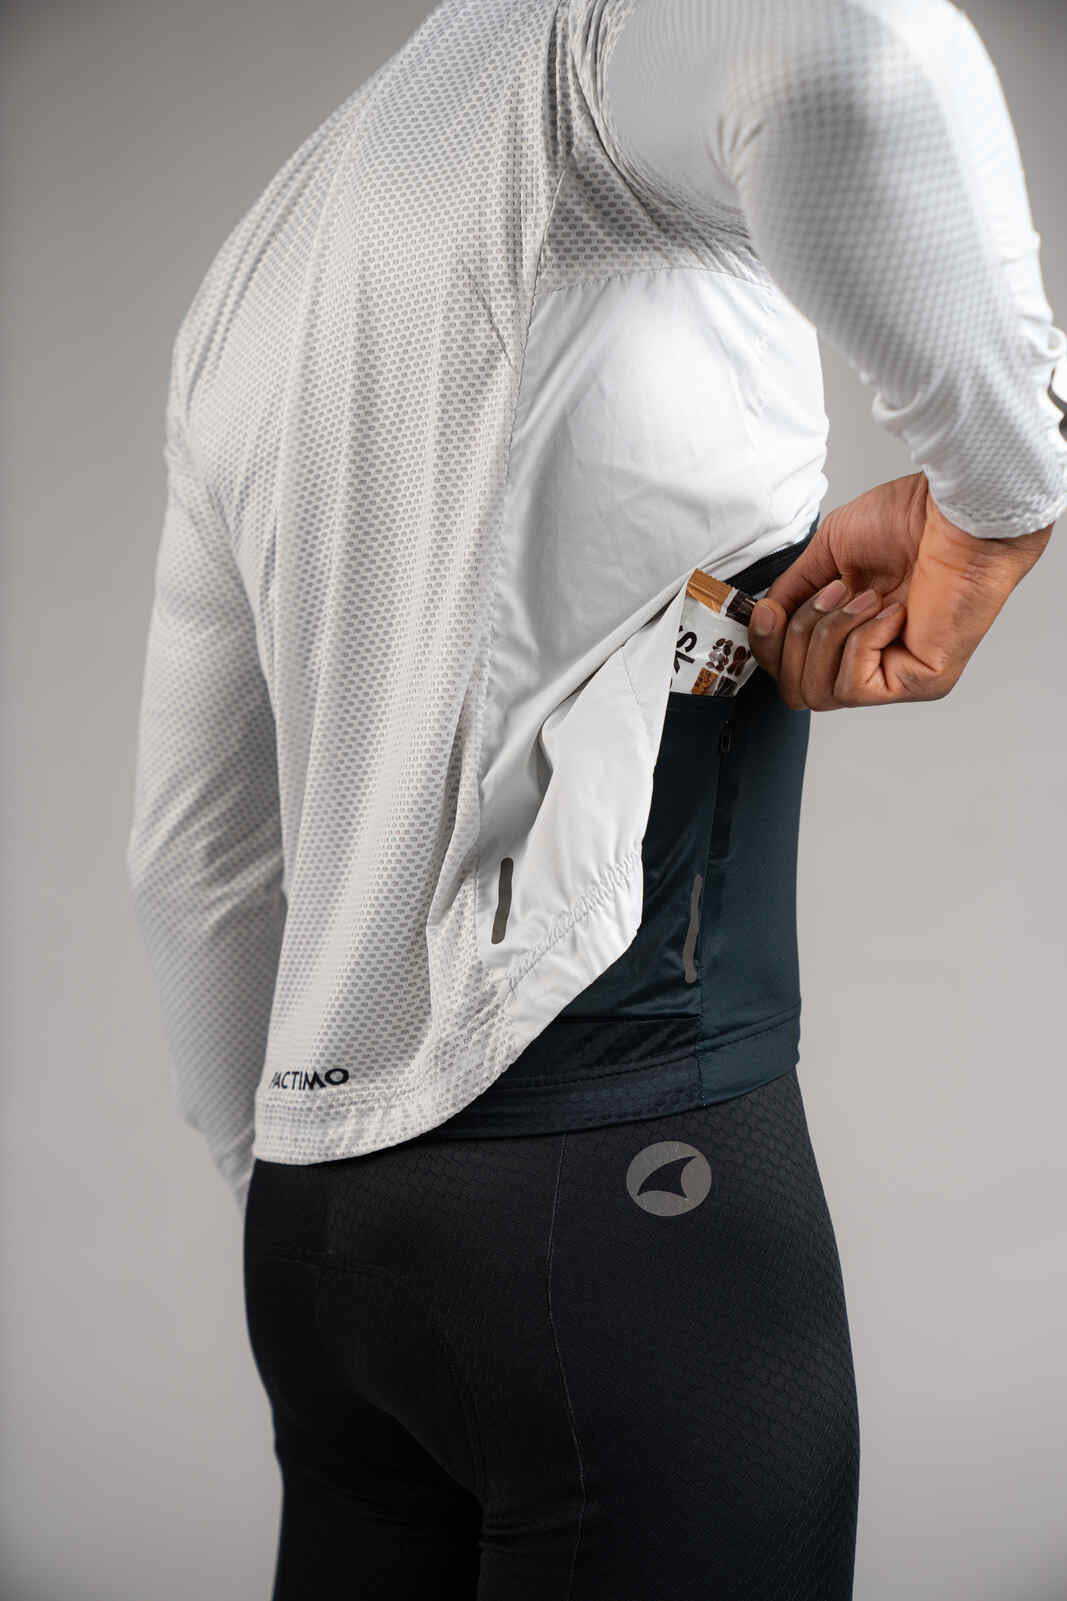 Men's Packable White Cycling Wind Jacket - Back Pocket Access